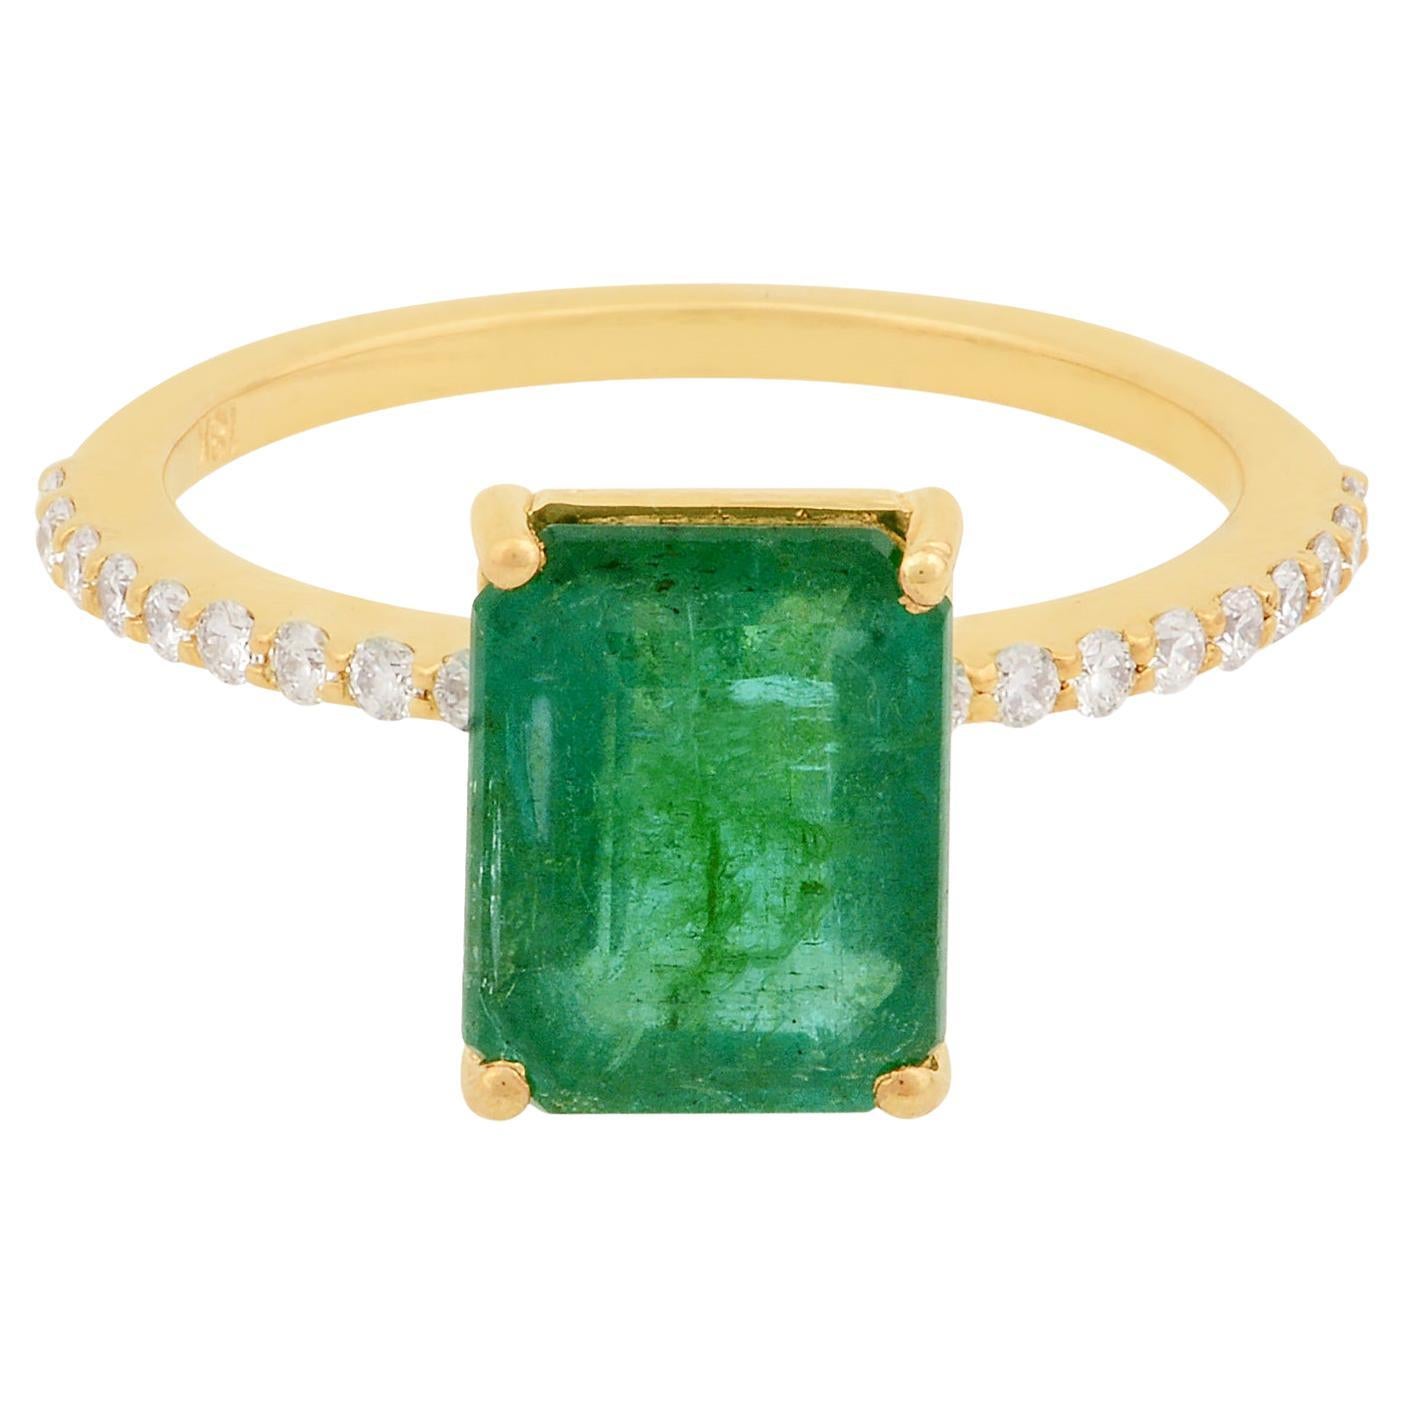 Natural Emerald Gemstone Ring Diamond Pave Solid 18k Yellow Gold Jewelry